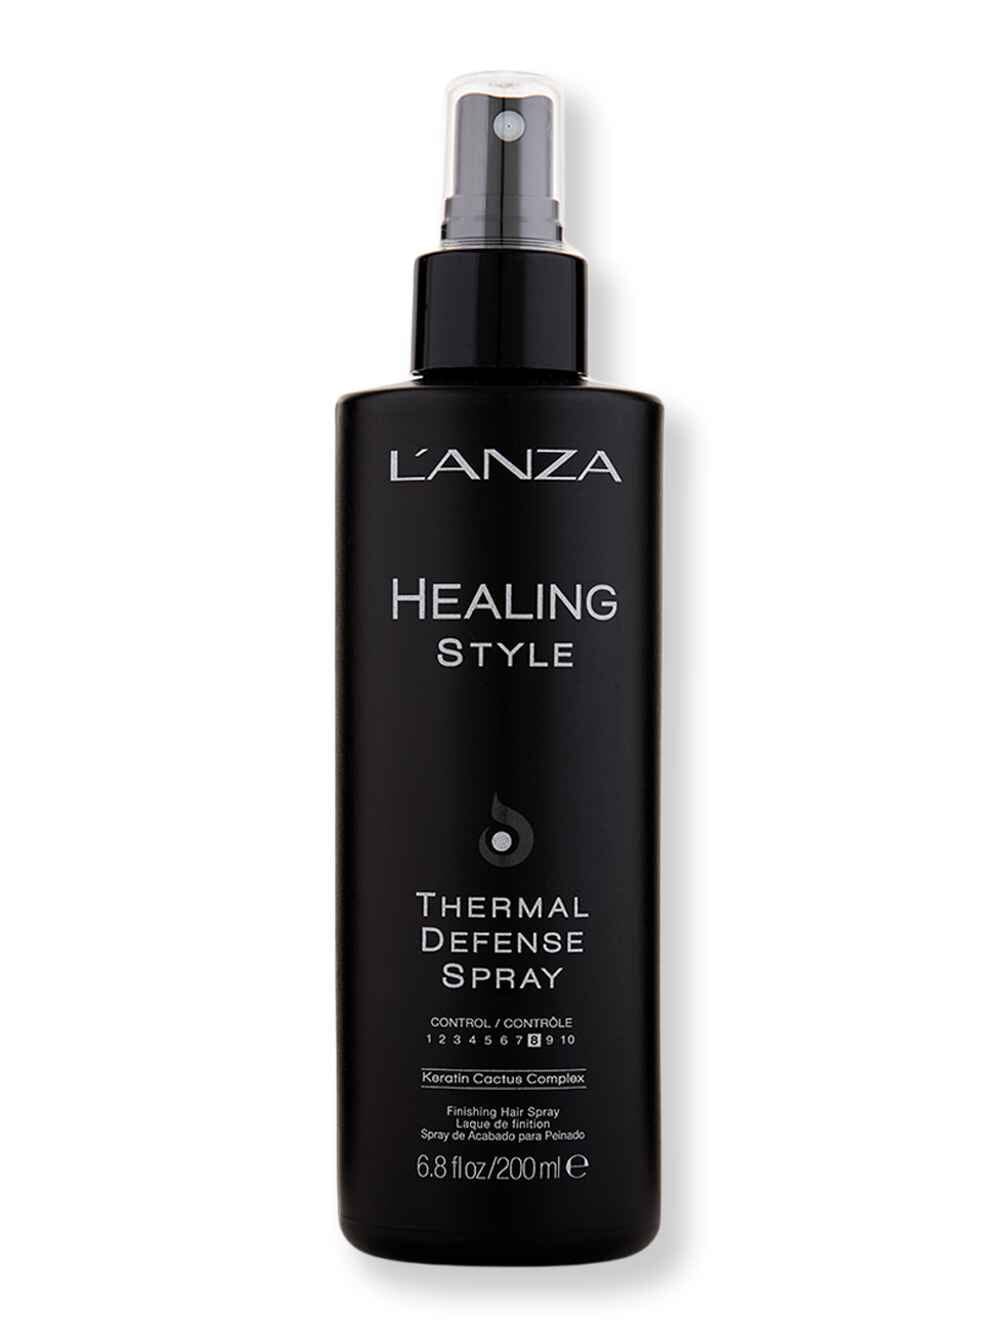 L'Anza L'Anza Healing Style Thermal Defense 200 ml Styling Treatments 